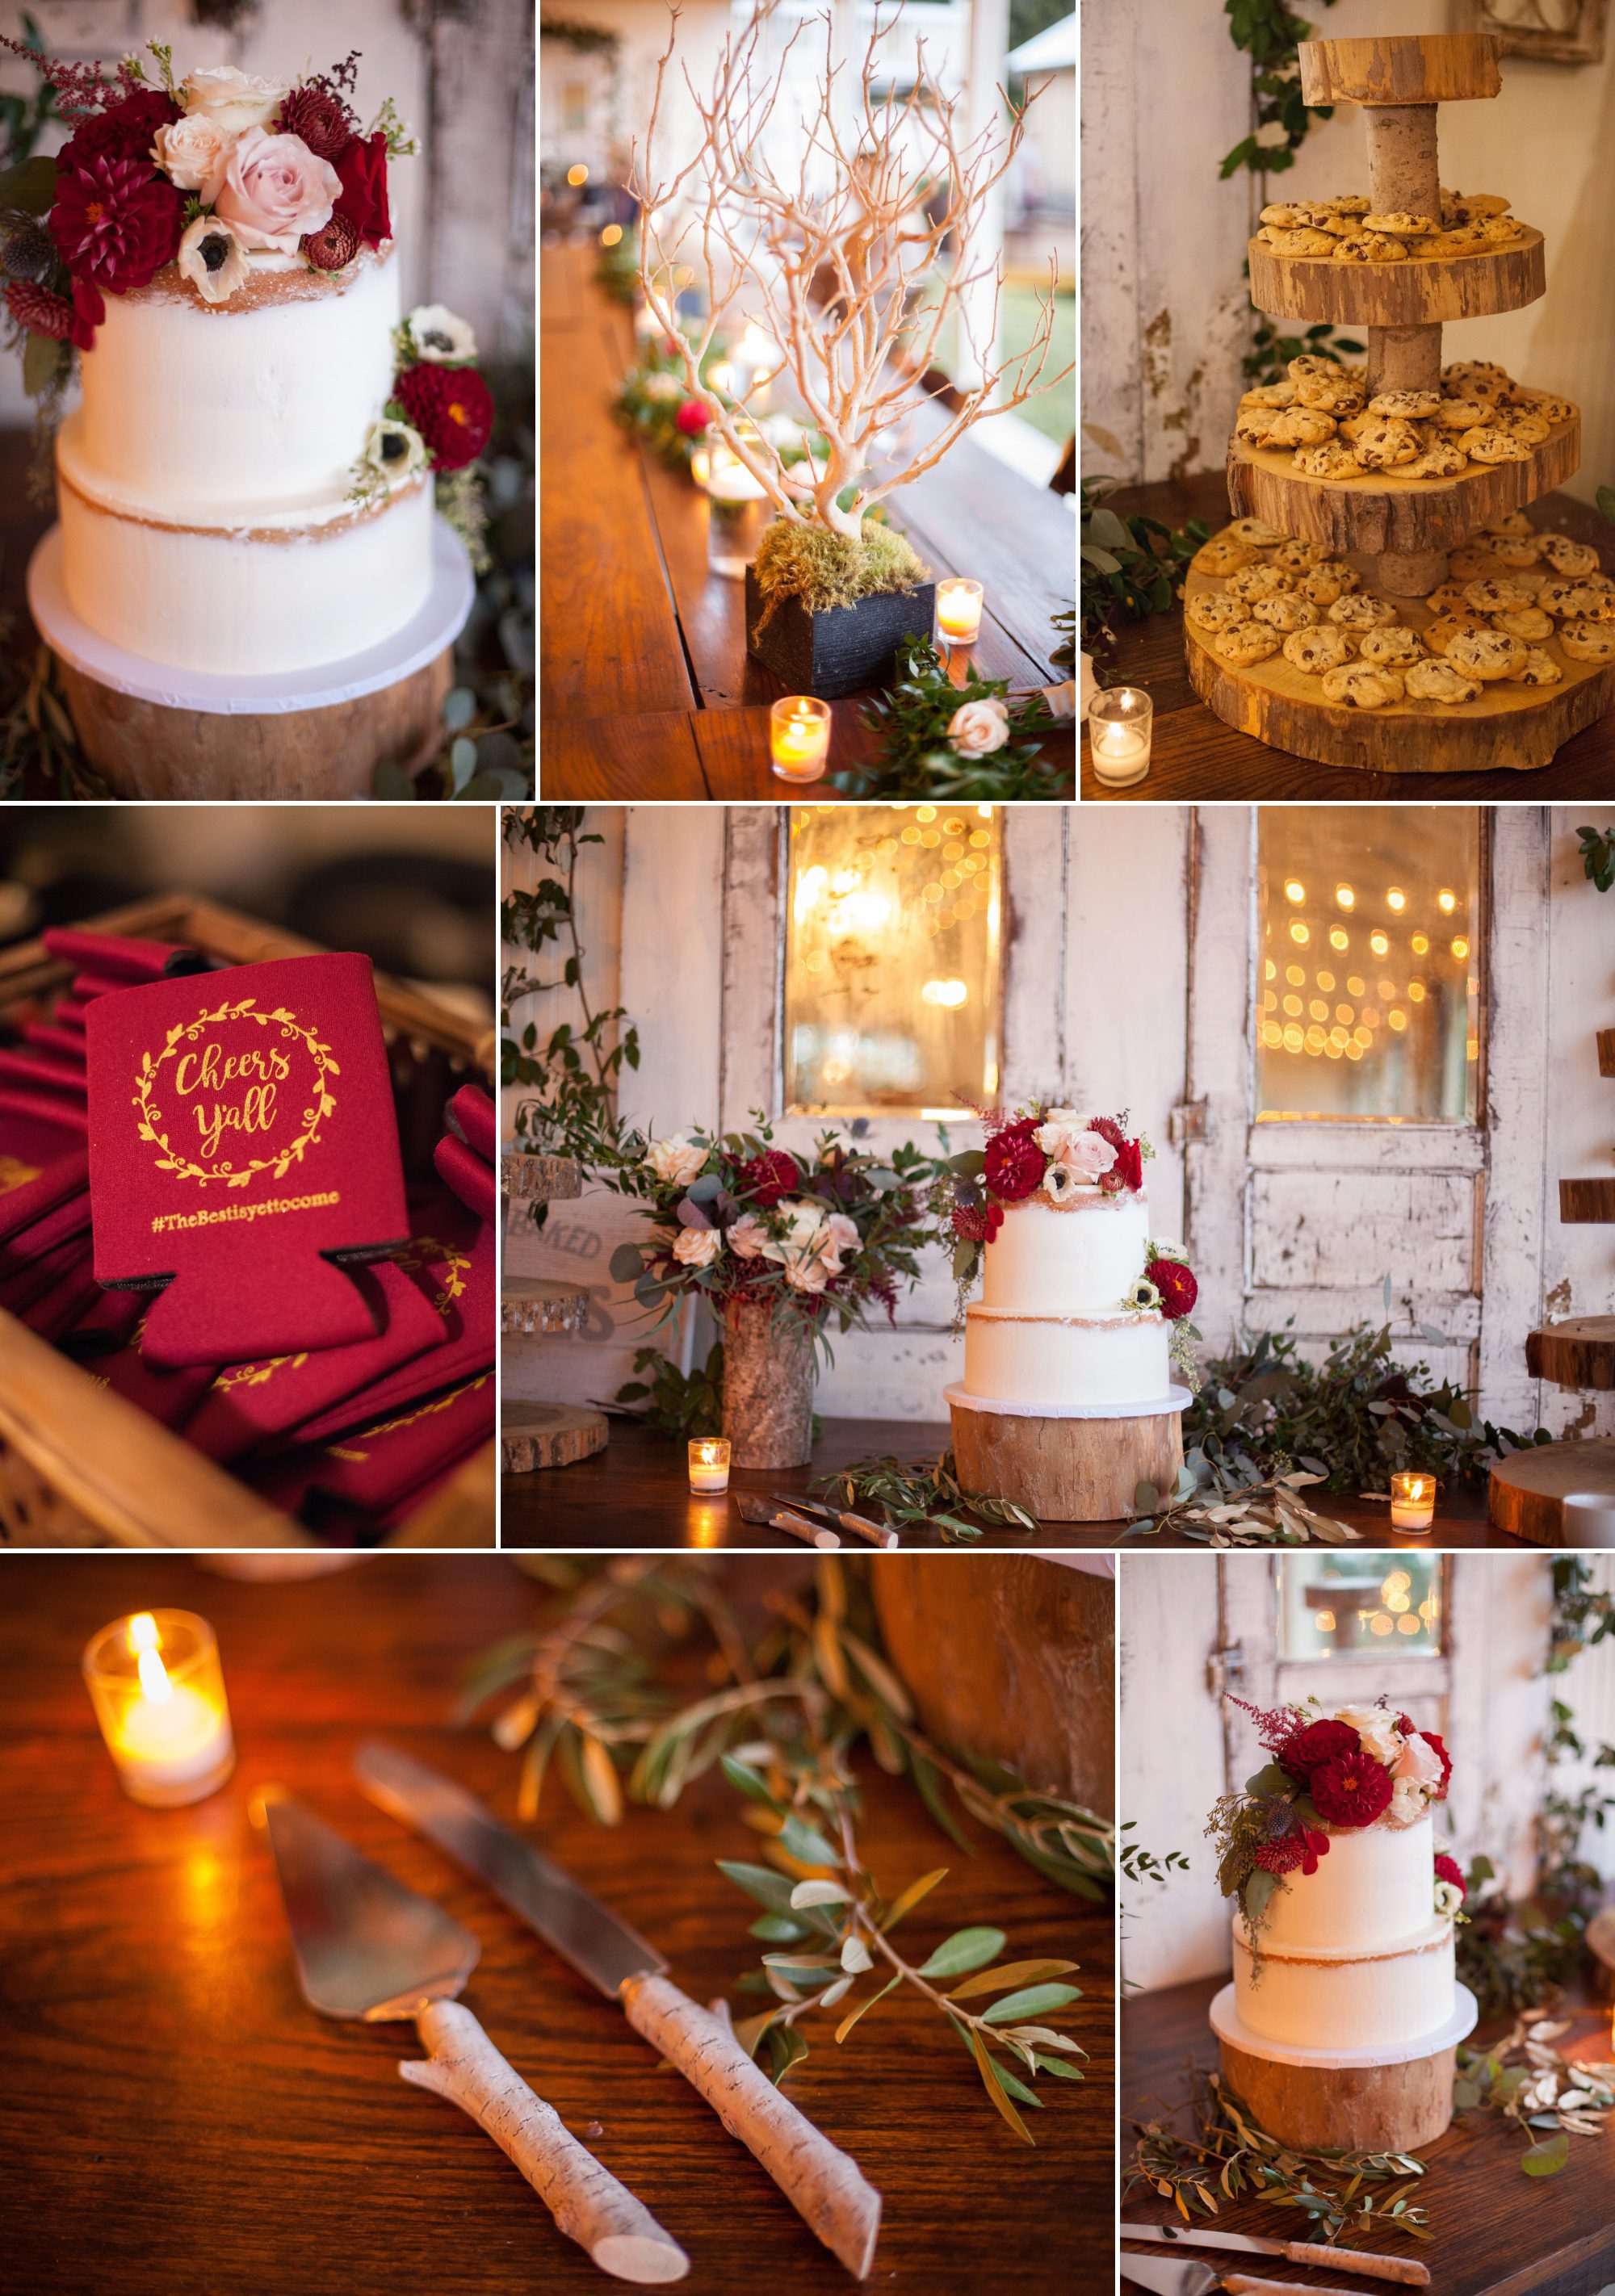 Gorgeous fall and winter colors adorn this wedding reception after wedding ceremony photography at Front Porch Farms, Wedding photography by Krista Lee